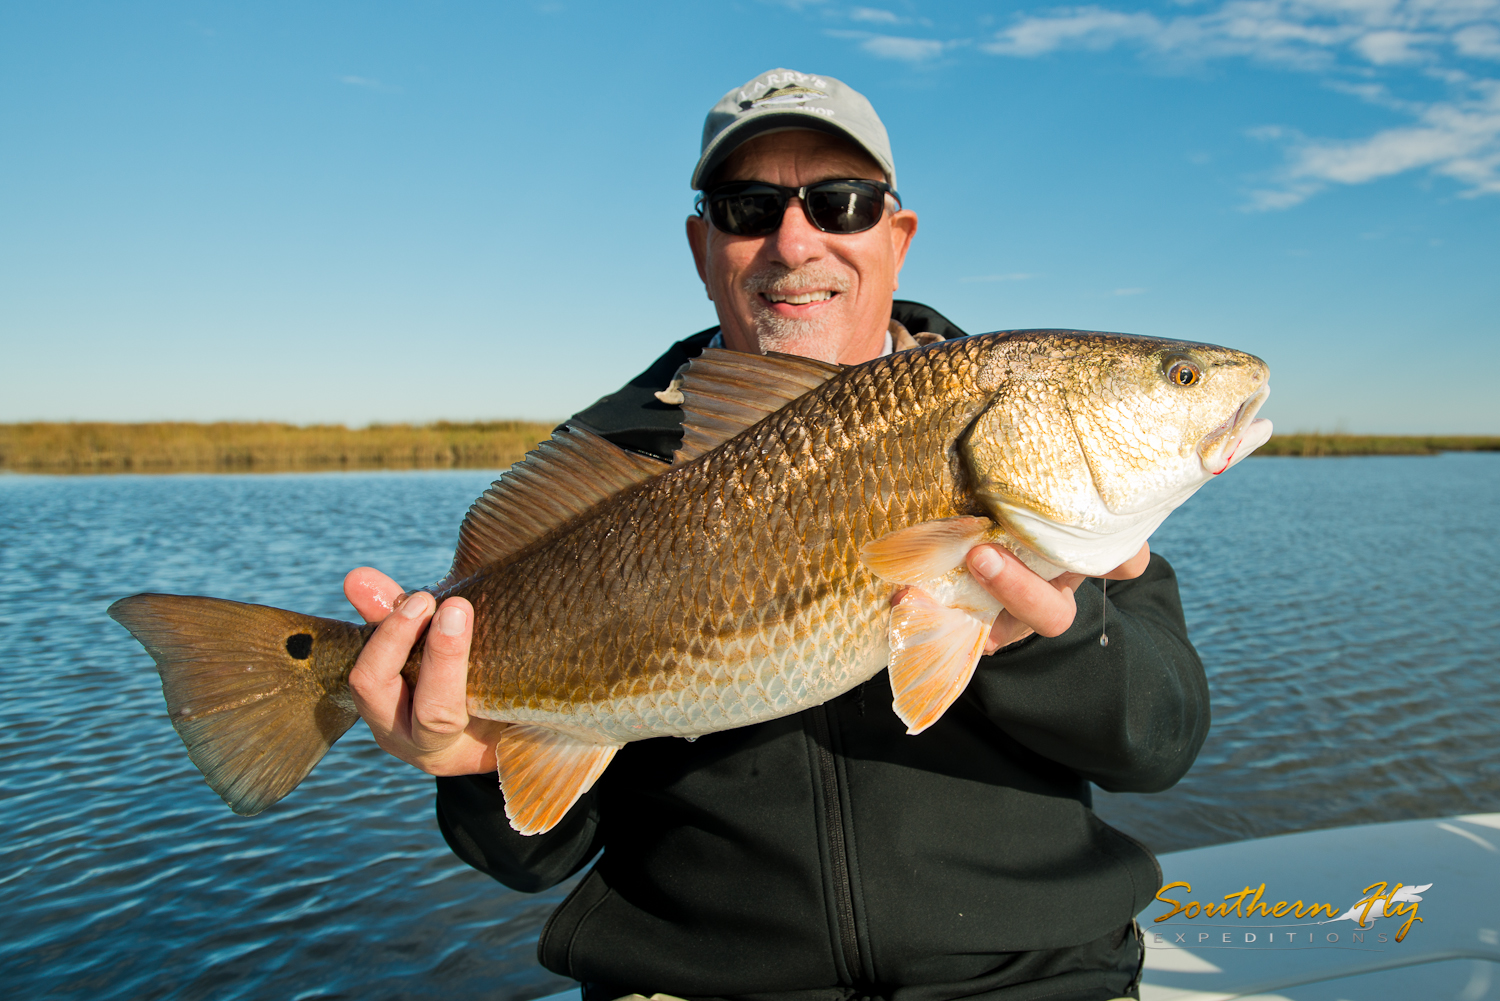 Fly Fishing new orleans with Southern Fly Expeditions best louisiana fly fishing guide 